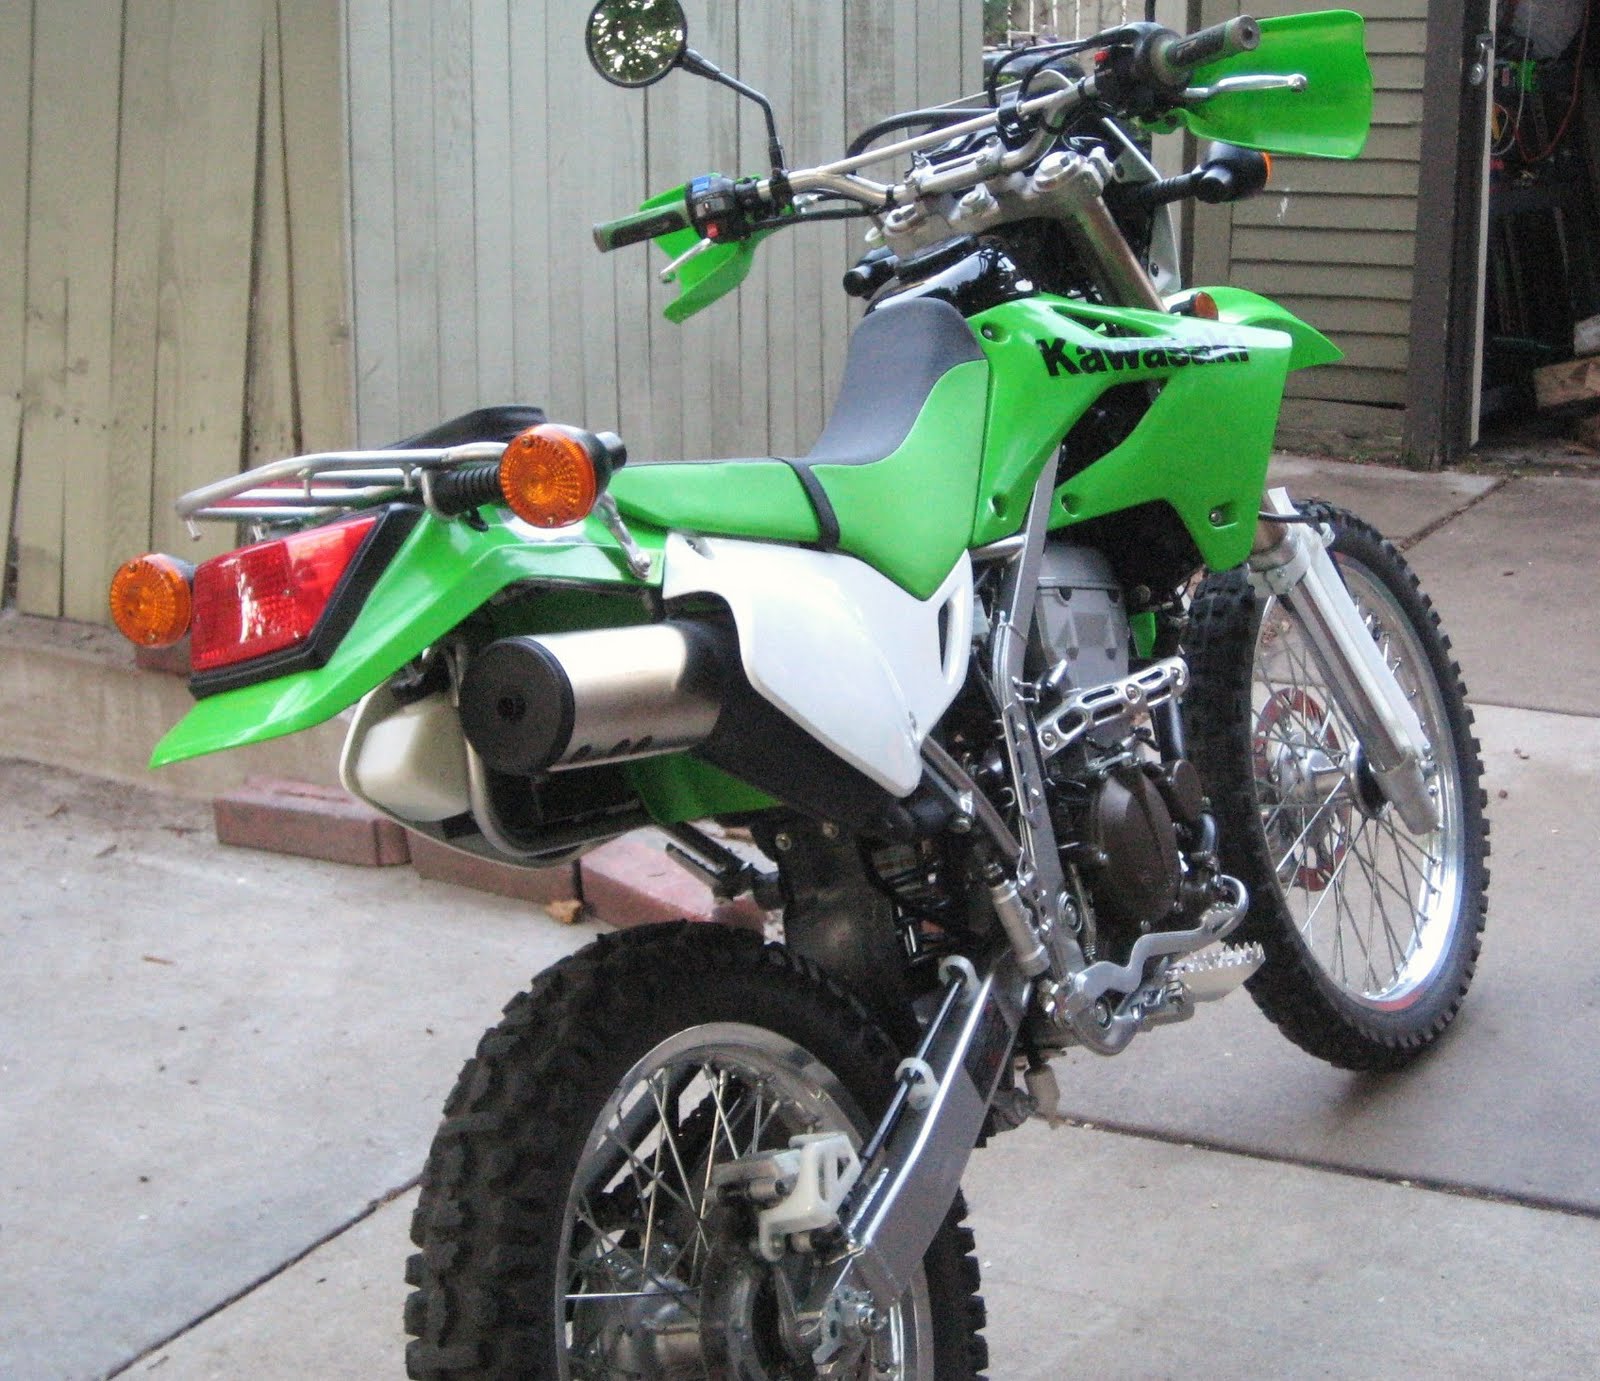 yamaha enduro 1973 1100 miles of riding the KLX 250 this summer and a few memories of the 